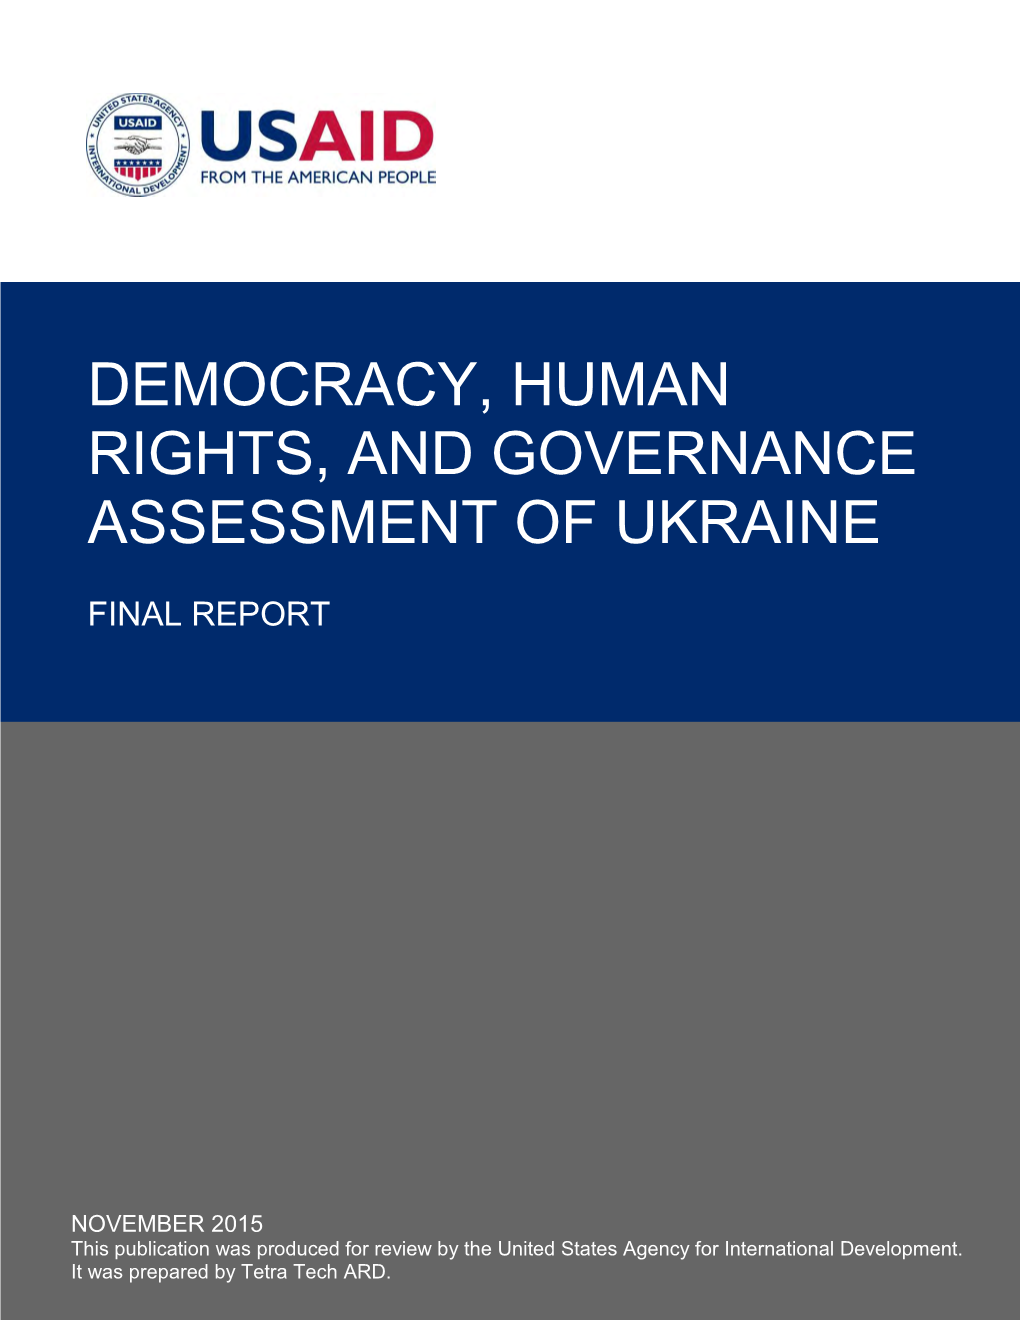 Democracy, Human Rights, and Governance Assessment of Ukraine